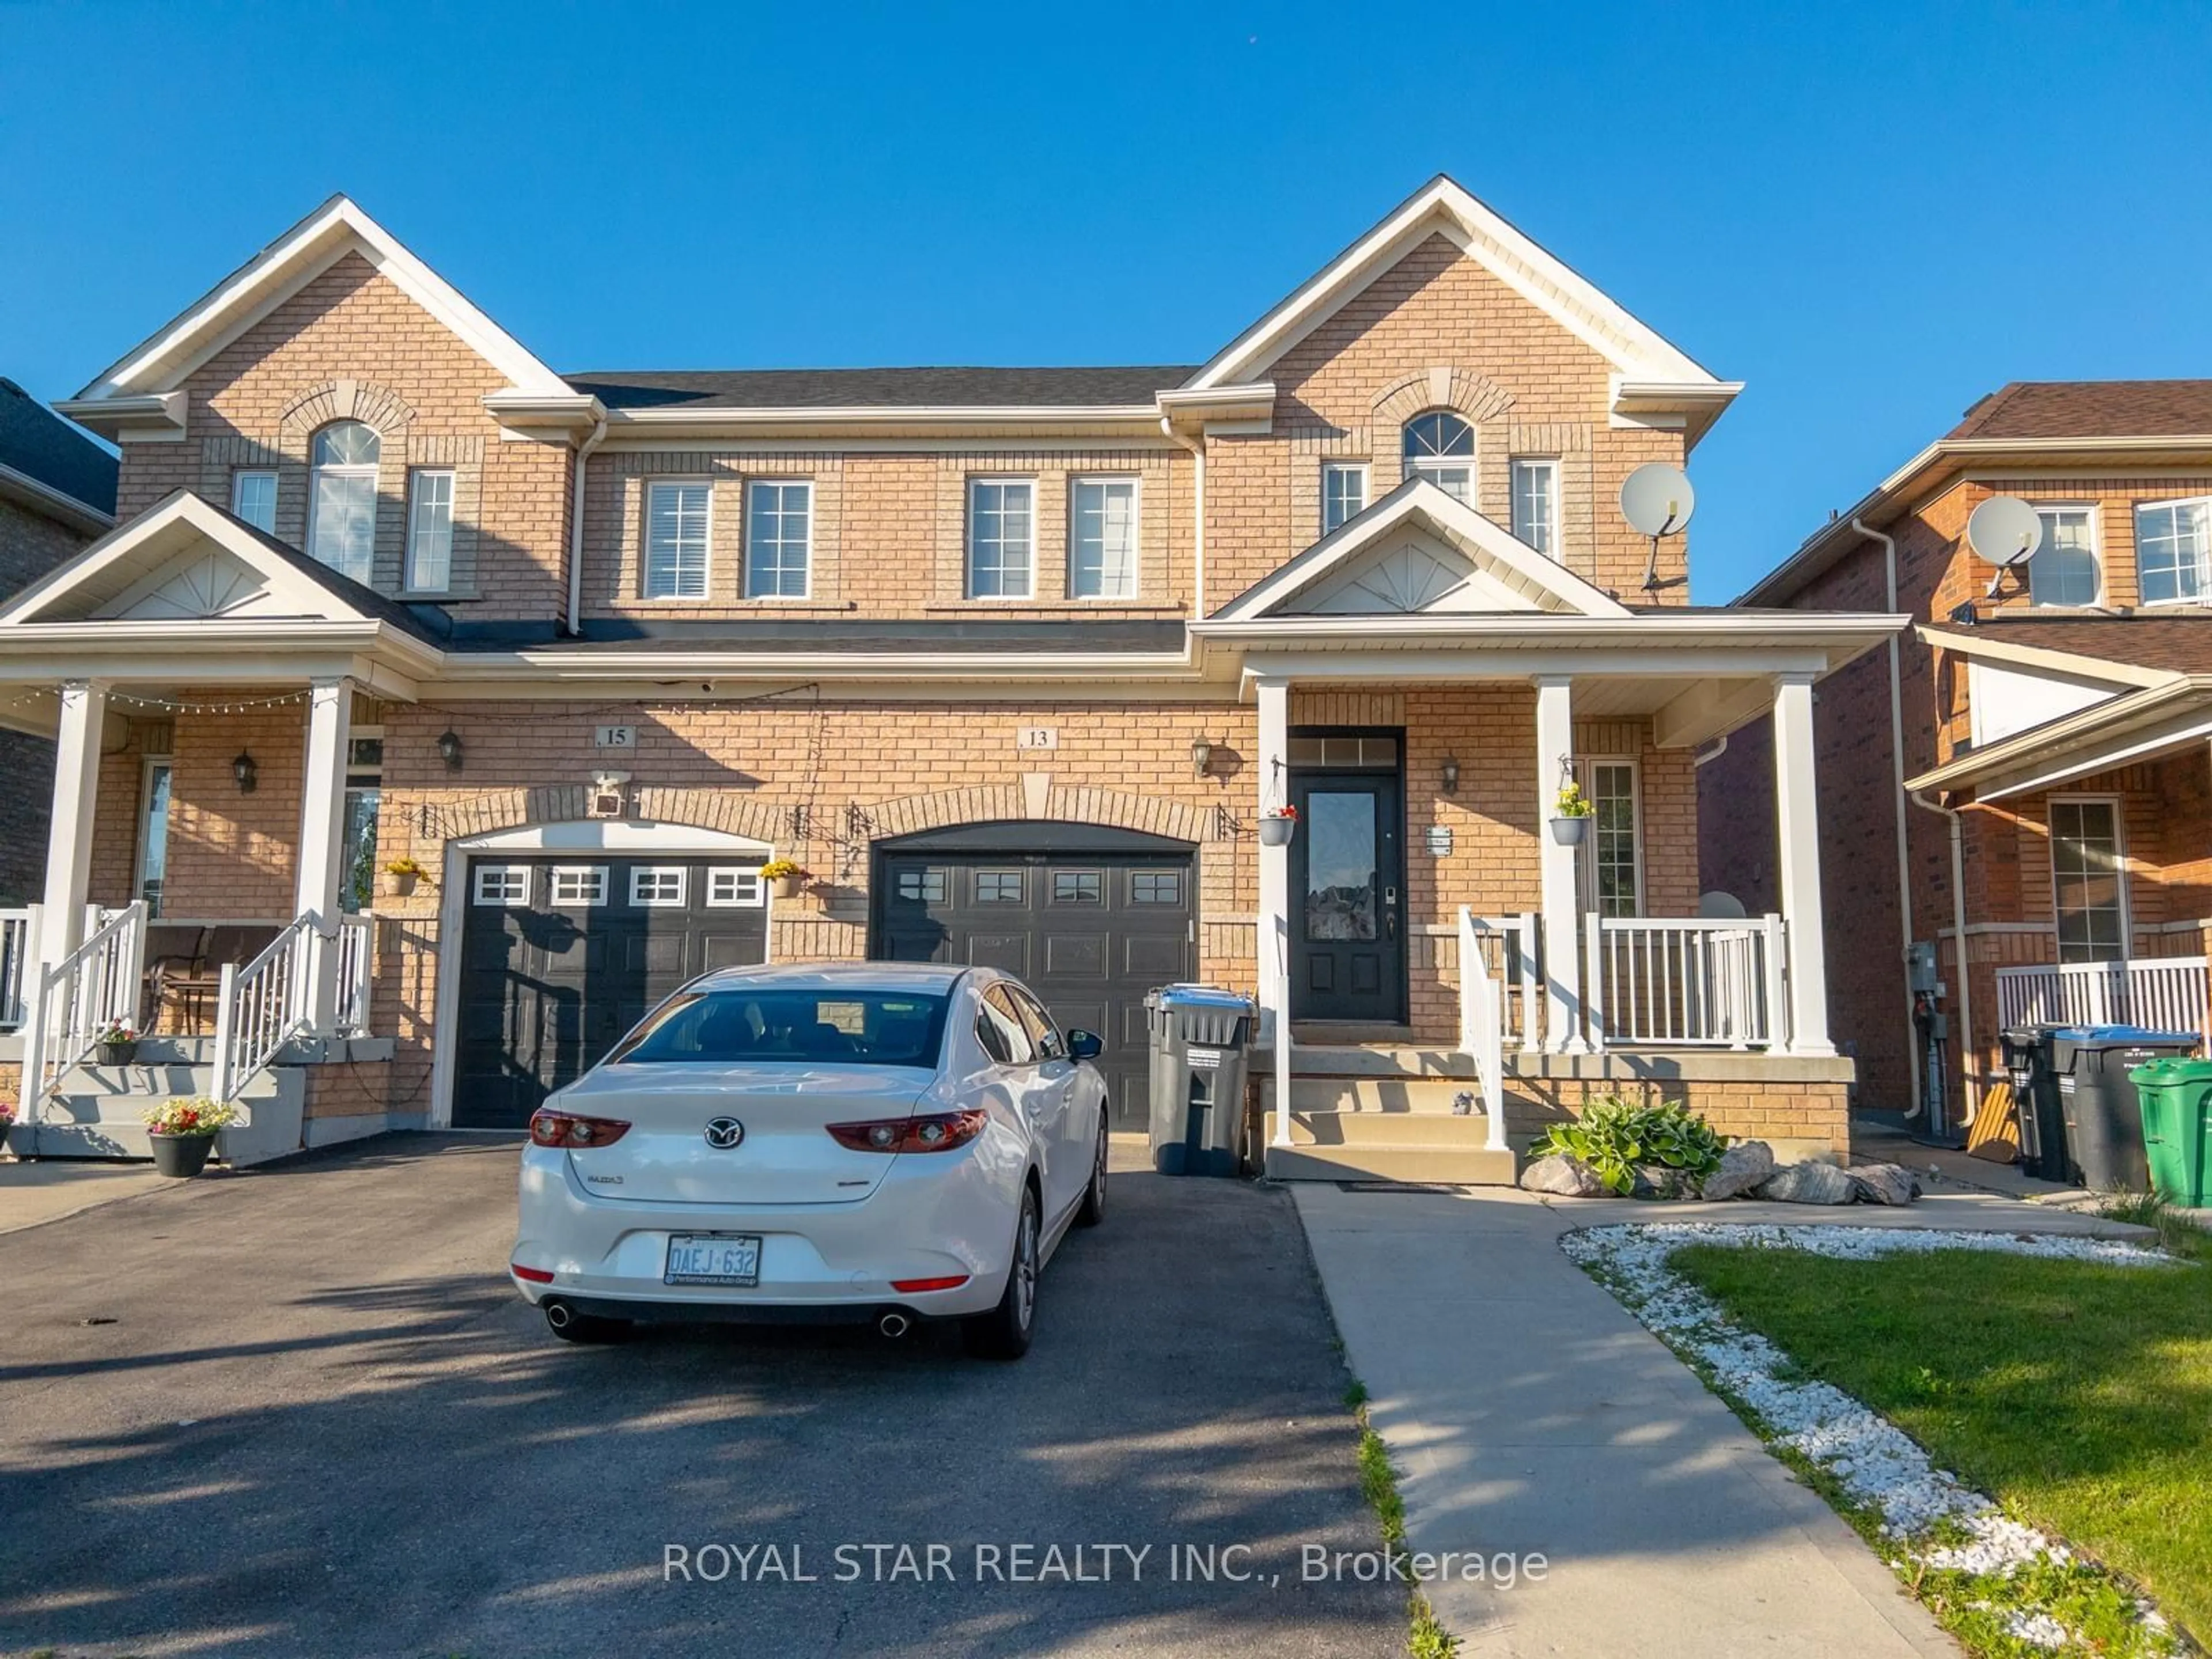 Home with brick exterior material for 13 Fawson Cove Way, Brampton Ontario L6R 0G7